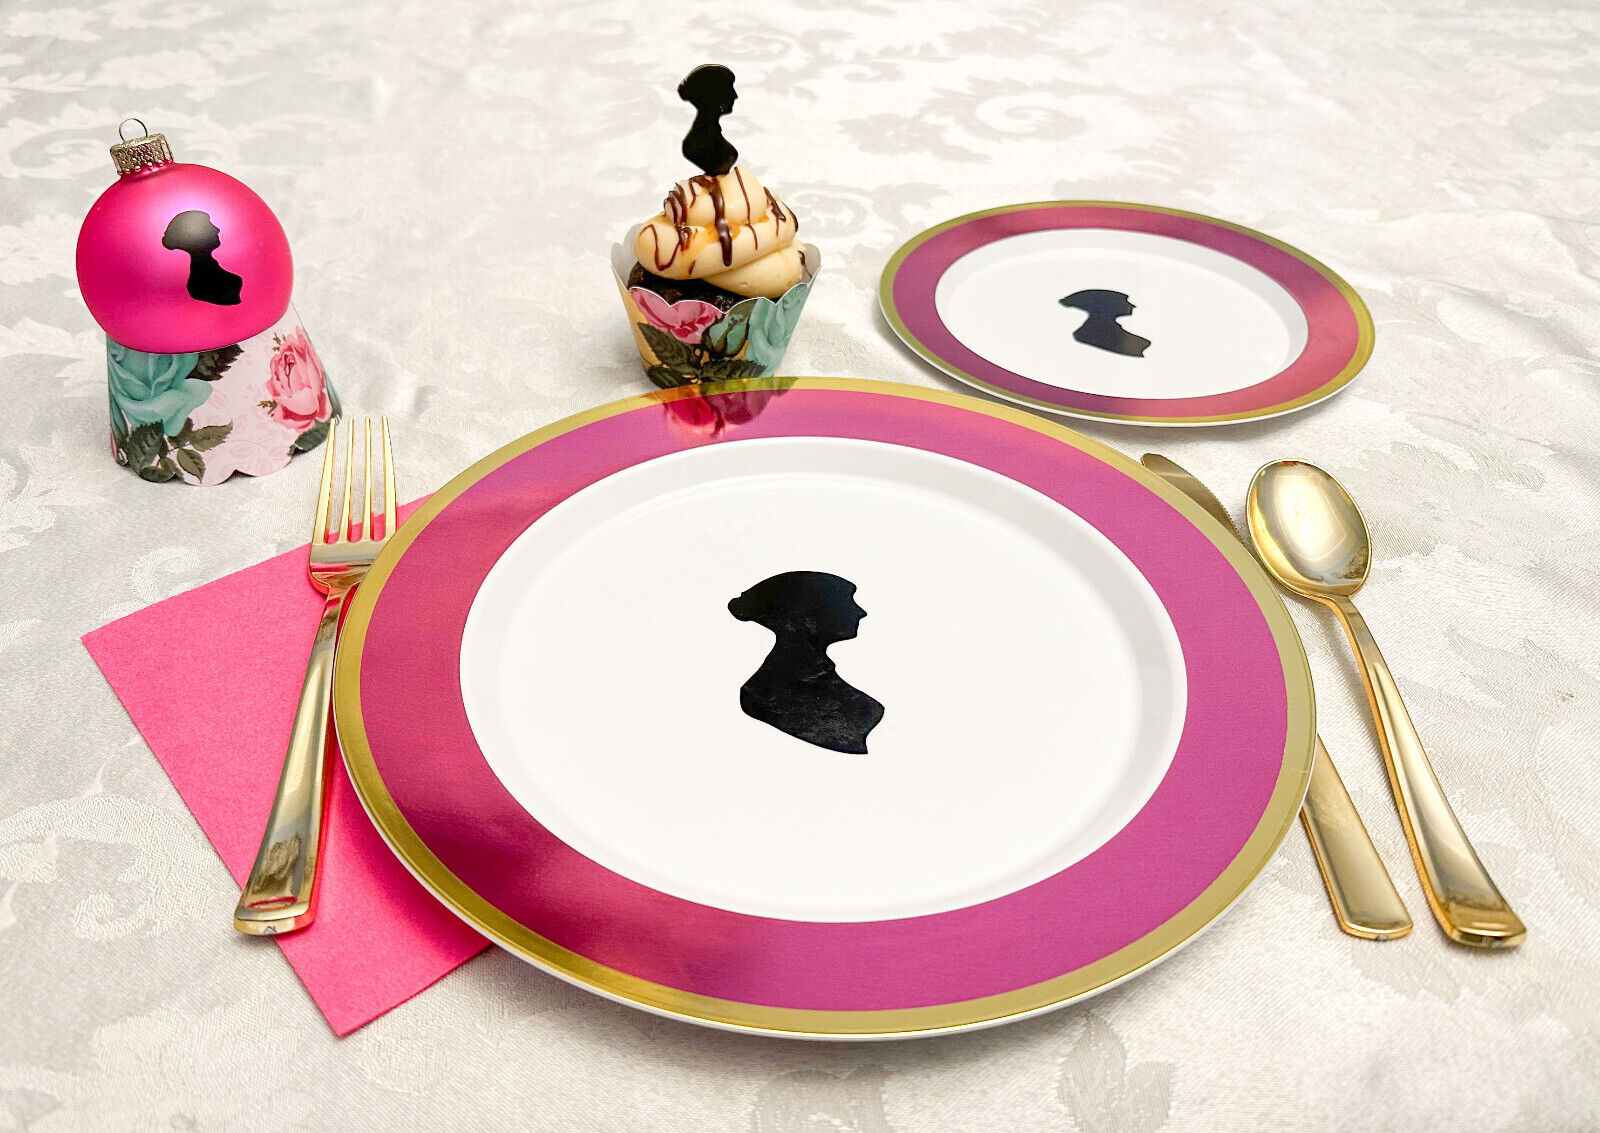 Jane Austen Party Kit for 1: Plates, Flatware, Napkins, Cupcake Wrappers+